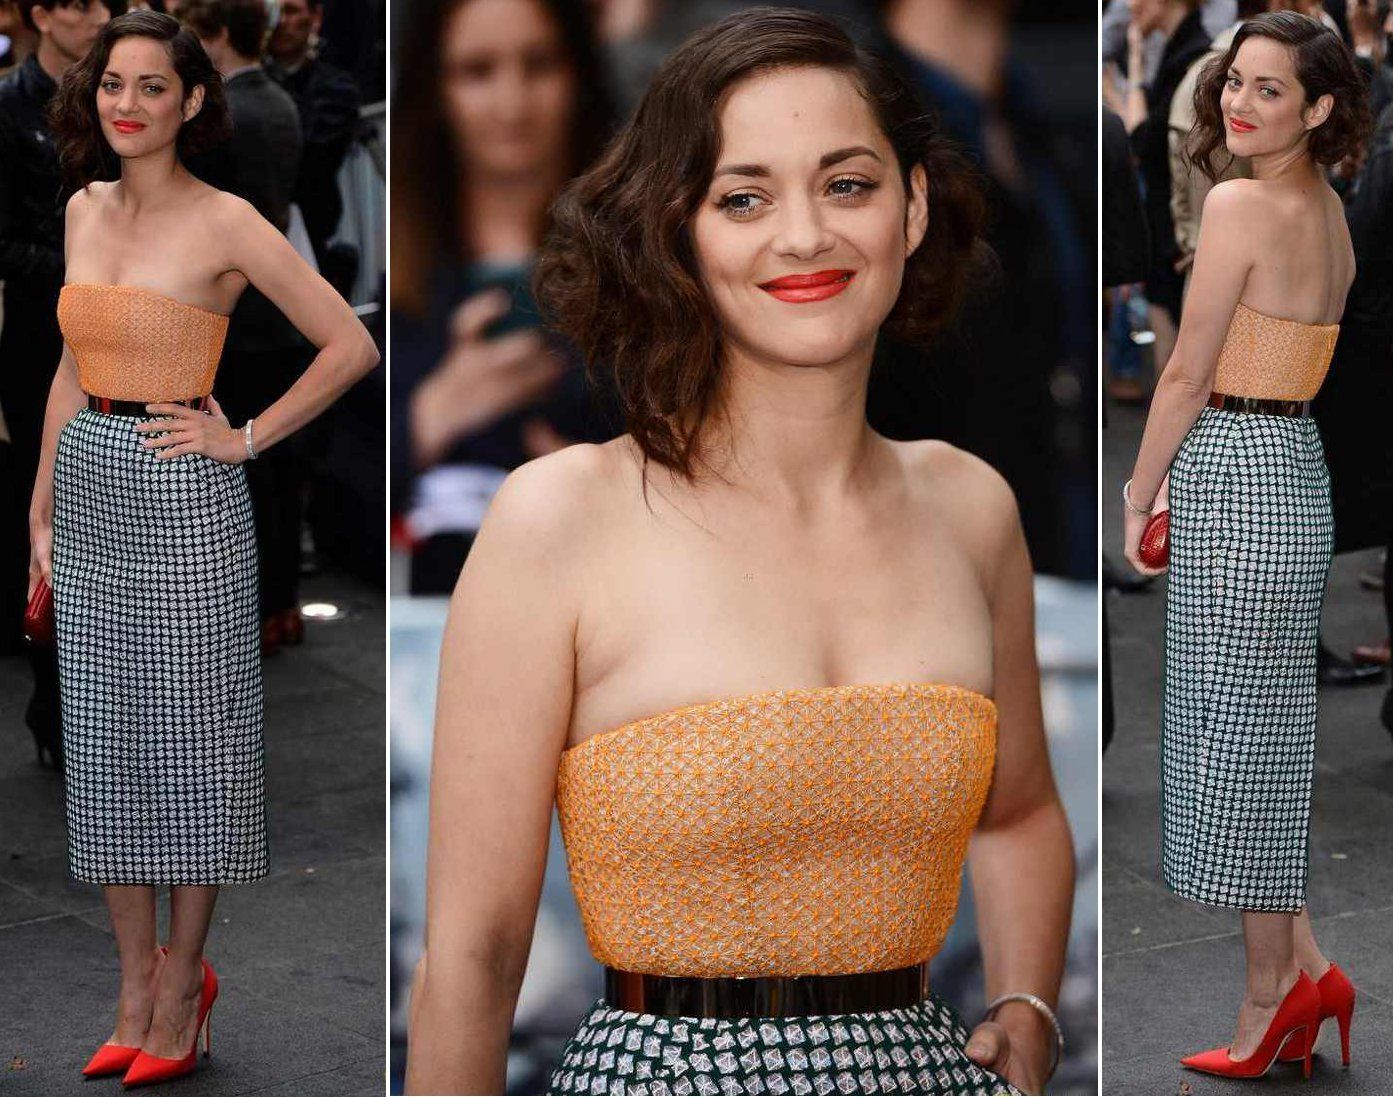 Marion Cotillard at the London premiere of "The Dark Knight Rises"